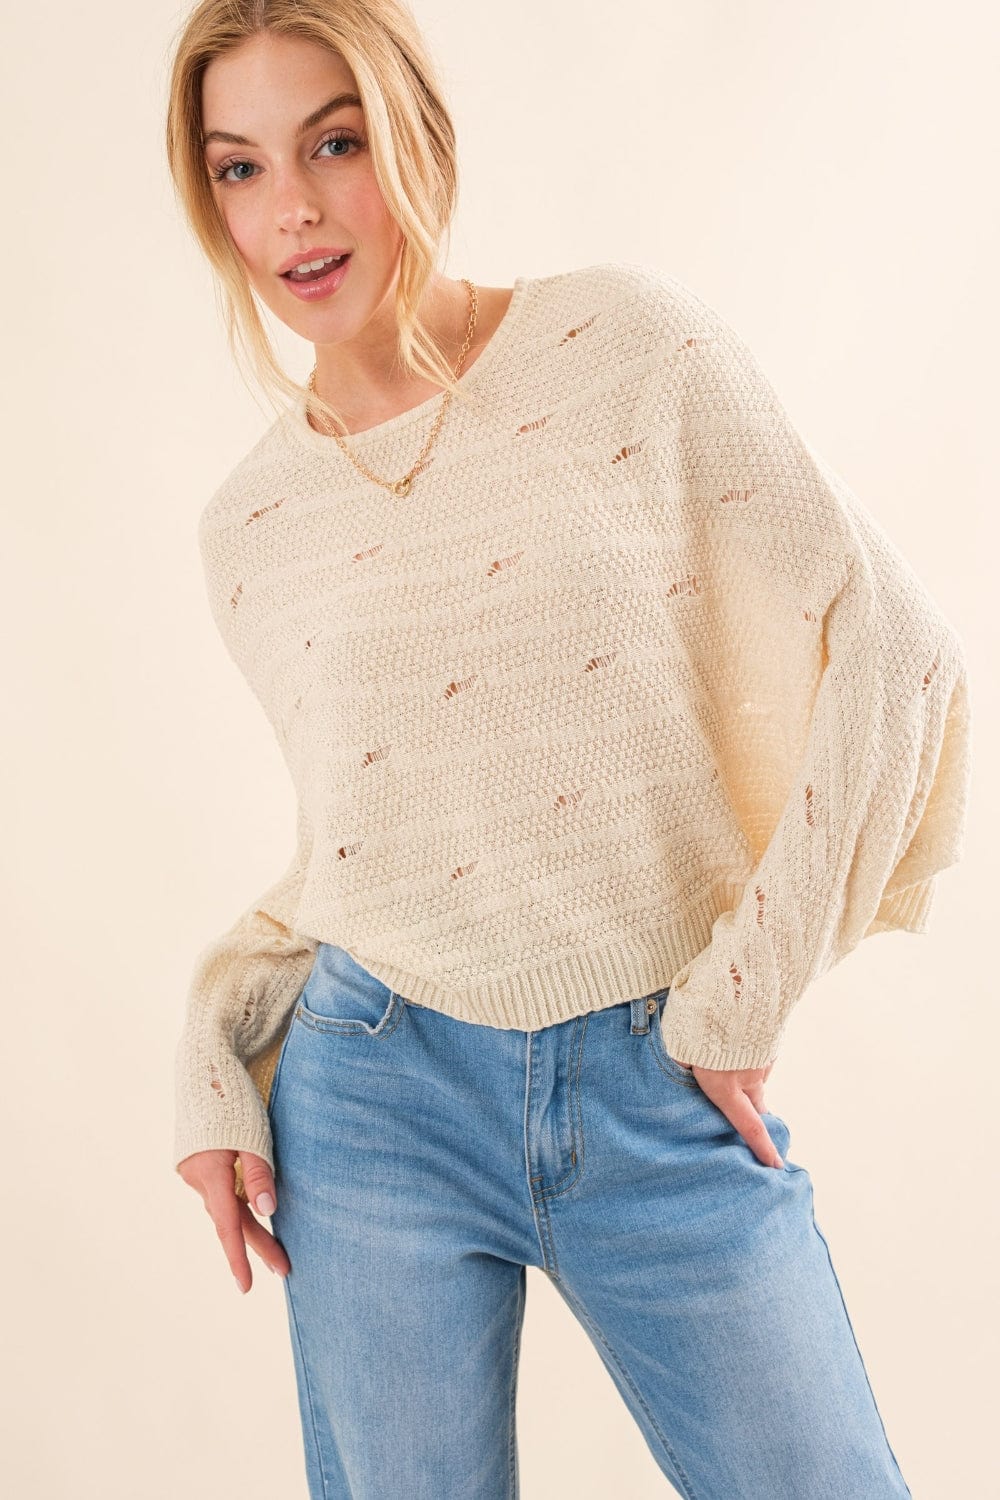 The802Gypsy shirts and tops NATURAL / S/M ❤️GYPSY-And The Why-Dolman Sleeves Sweater